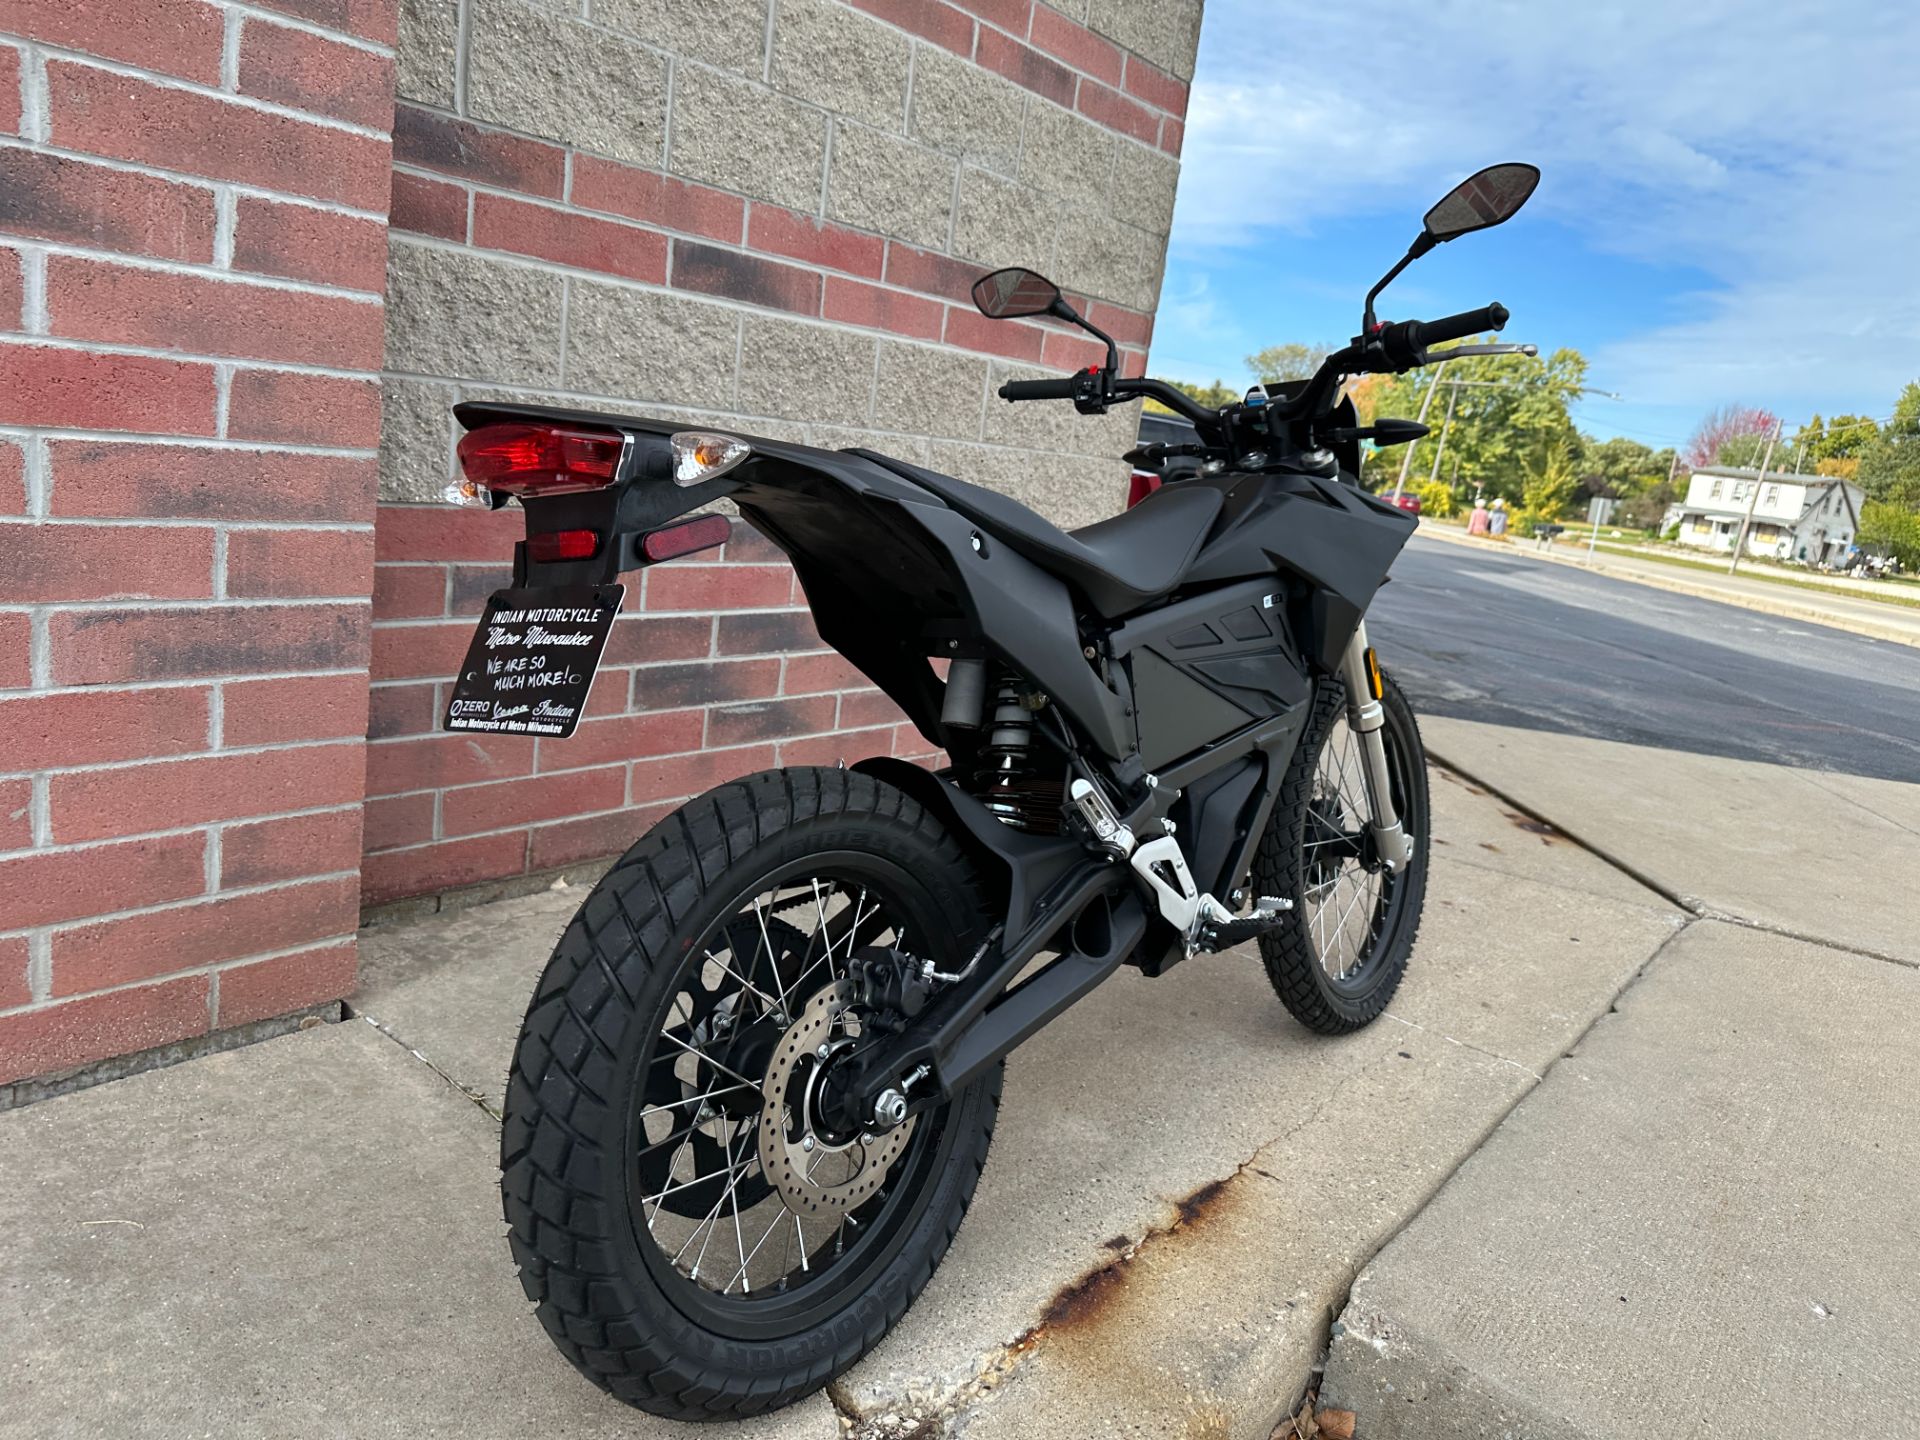 2023 Zero Motorcycles FX ZF7.2 Integrated in Muskego, Wisconsin - Photo 8